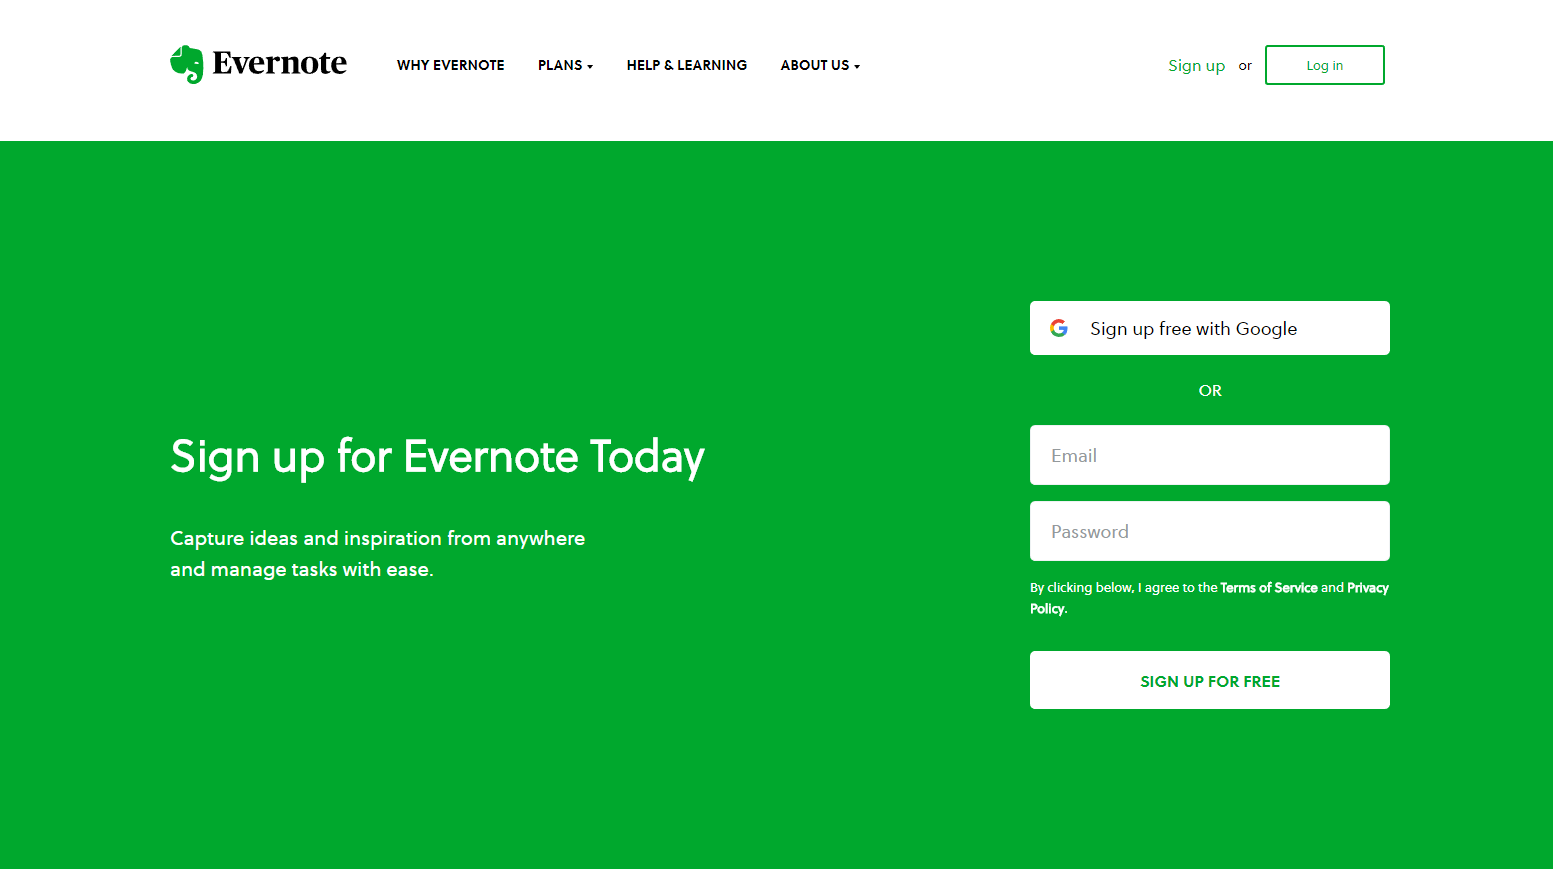 evernote-home-page-signup